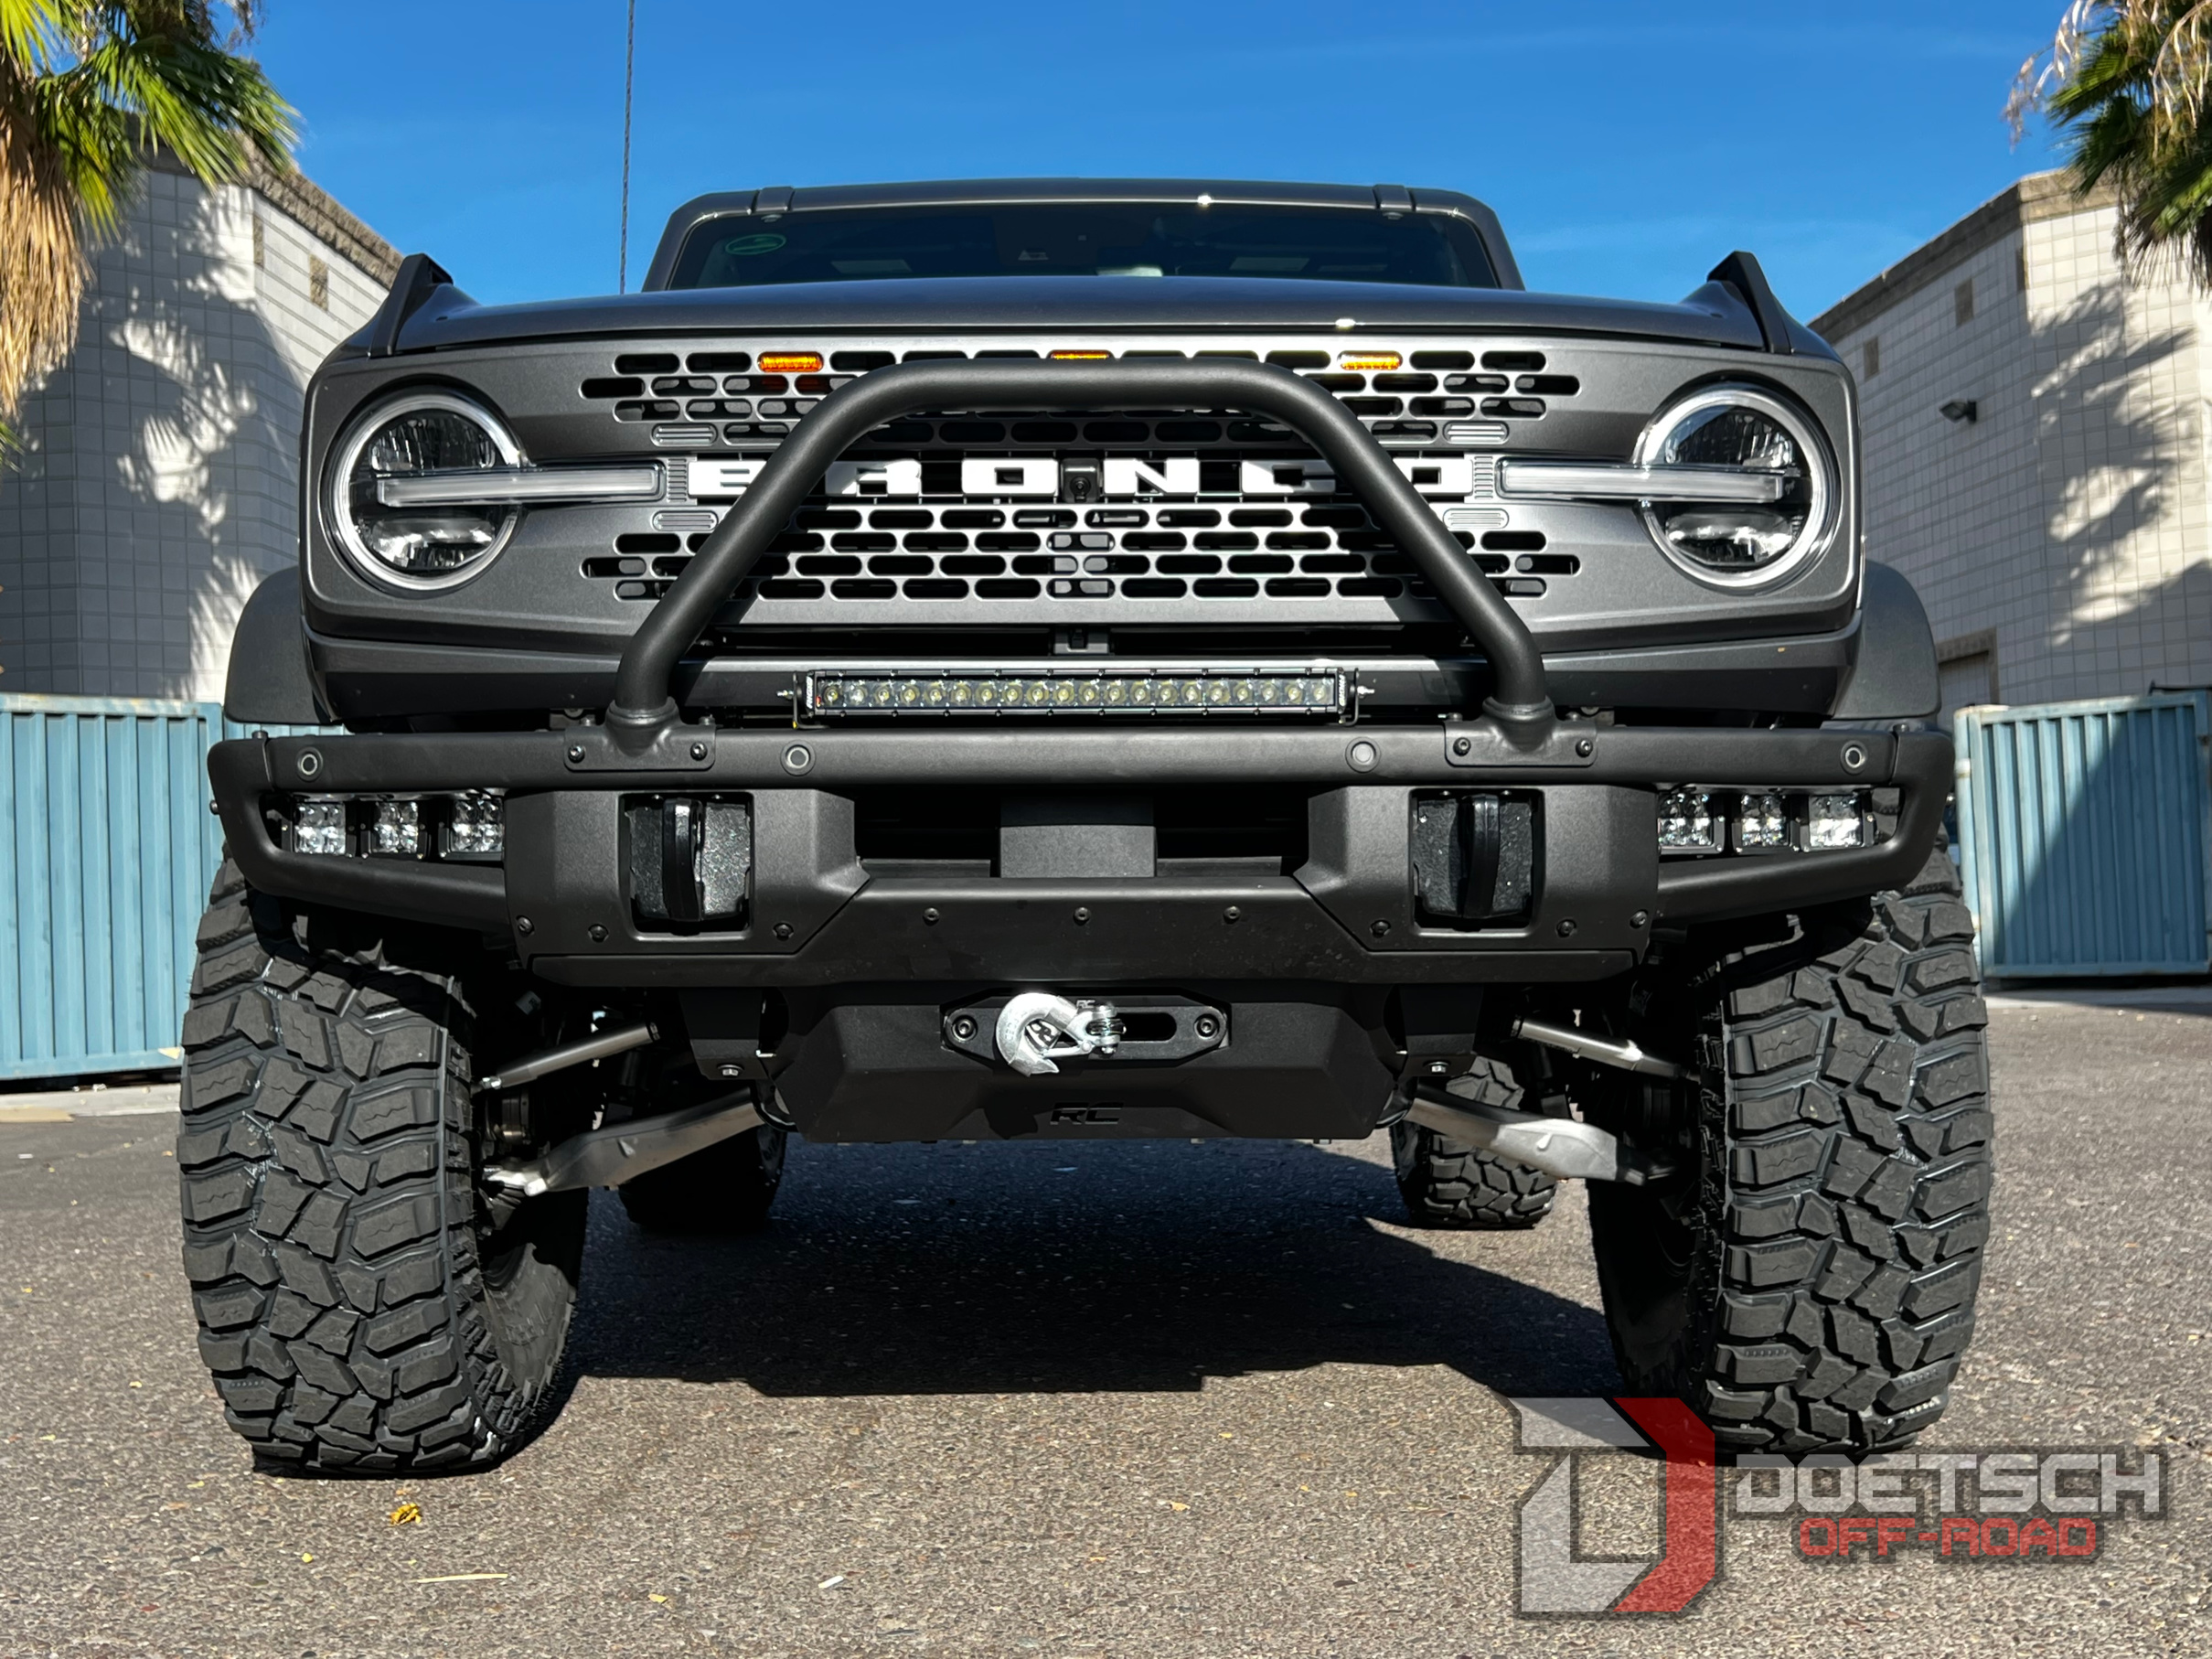 Ford Bronco Brians Big Bad 2dr Badlands.....Carbonized on 37" Icon Wheels & Fabtech 2.5 Coilovers Doetsch Off-Road3624 (18)